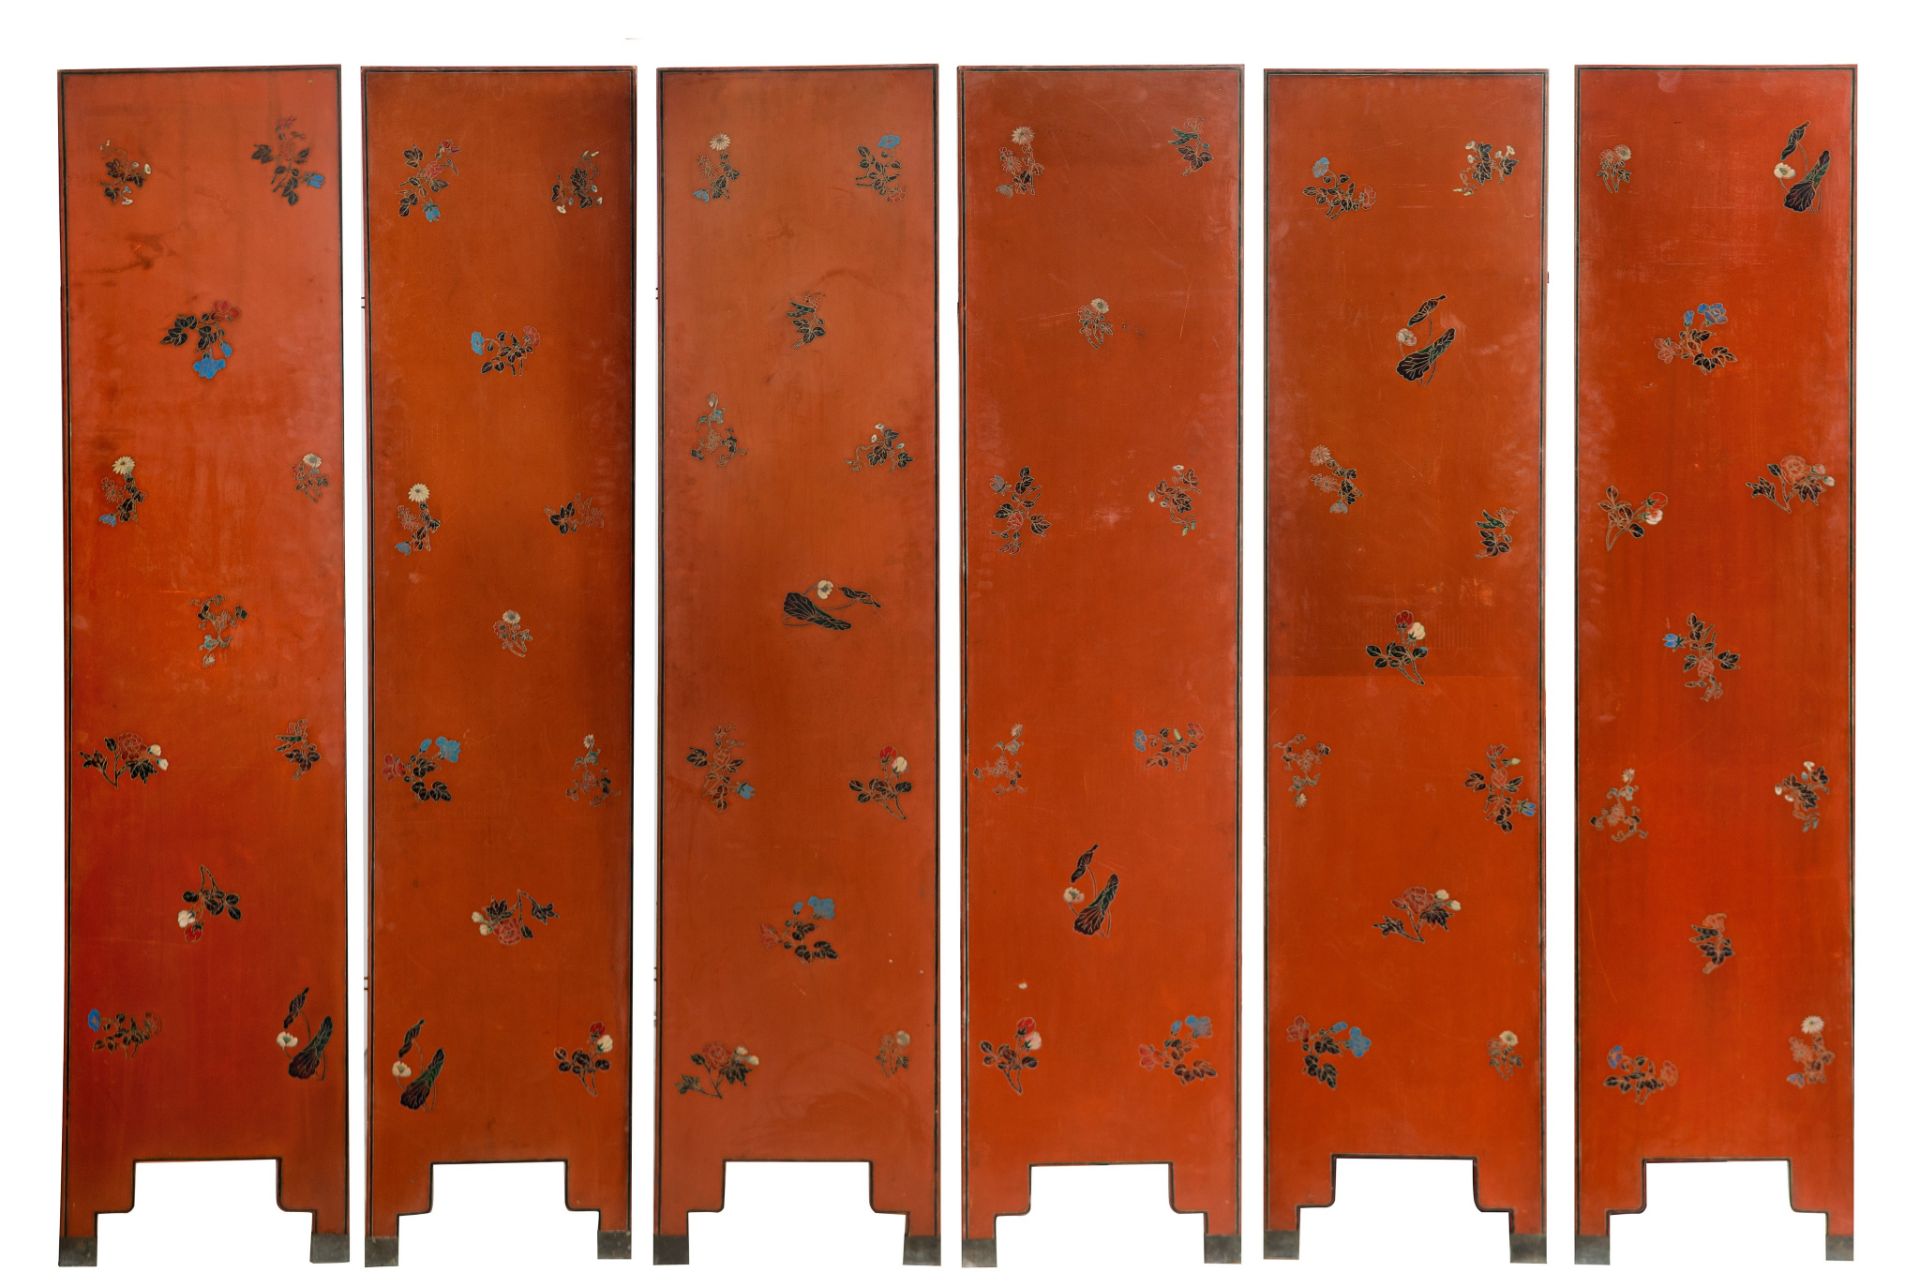 A Chinese six-fold lacquered chamber screen, late 19thC/20thC, Dimensions of one panel 183,3 x 40,5